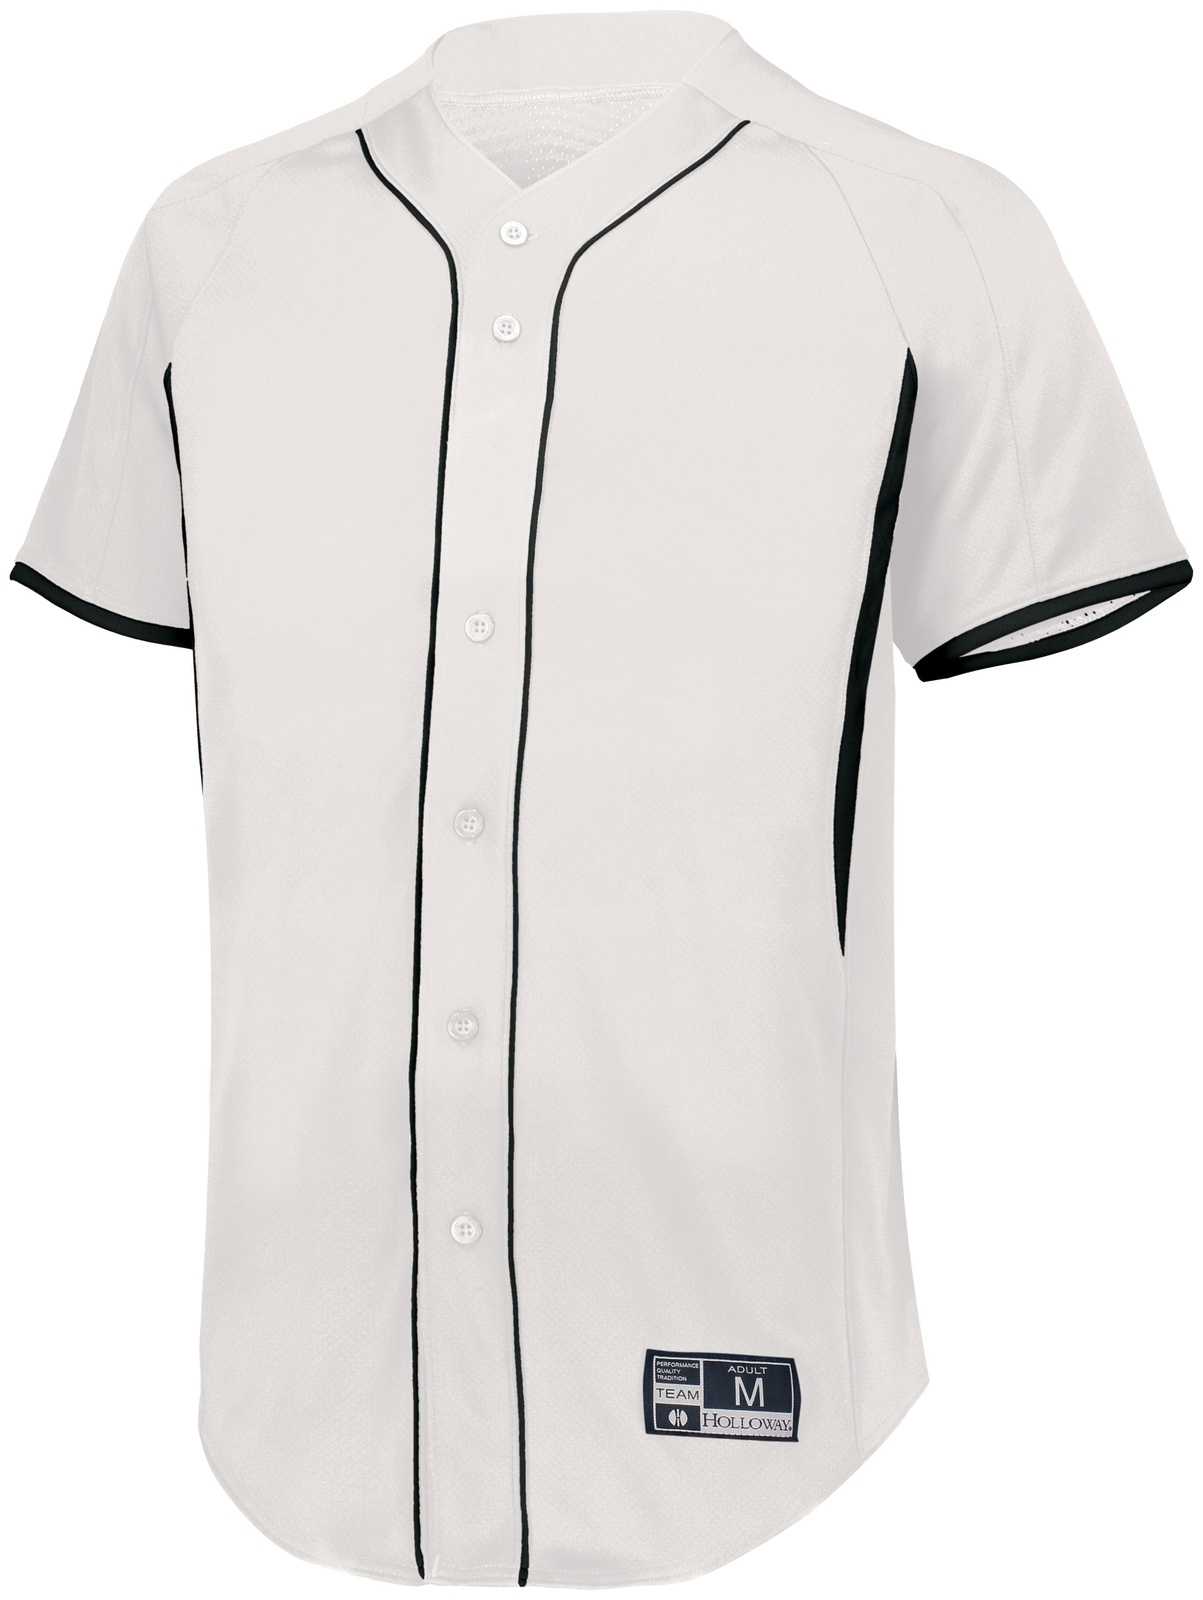 Holloway 221025 Game7 Full-Button Baseball Jersey - White Black - HIT a Double